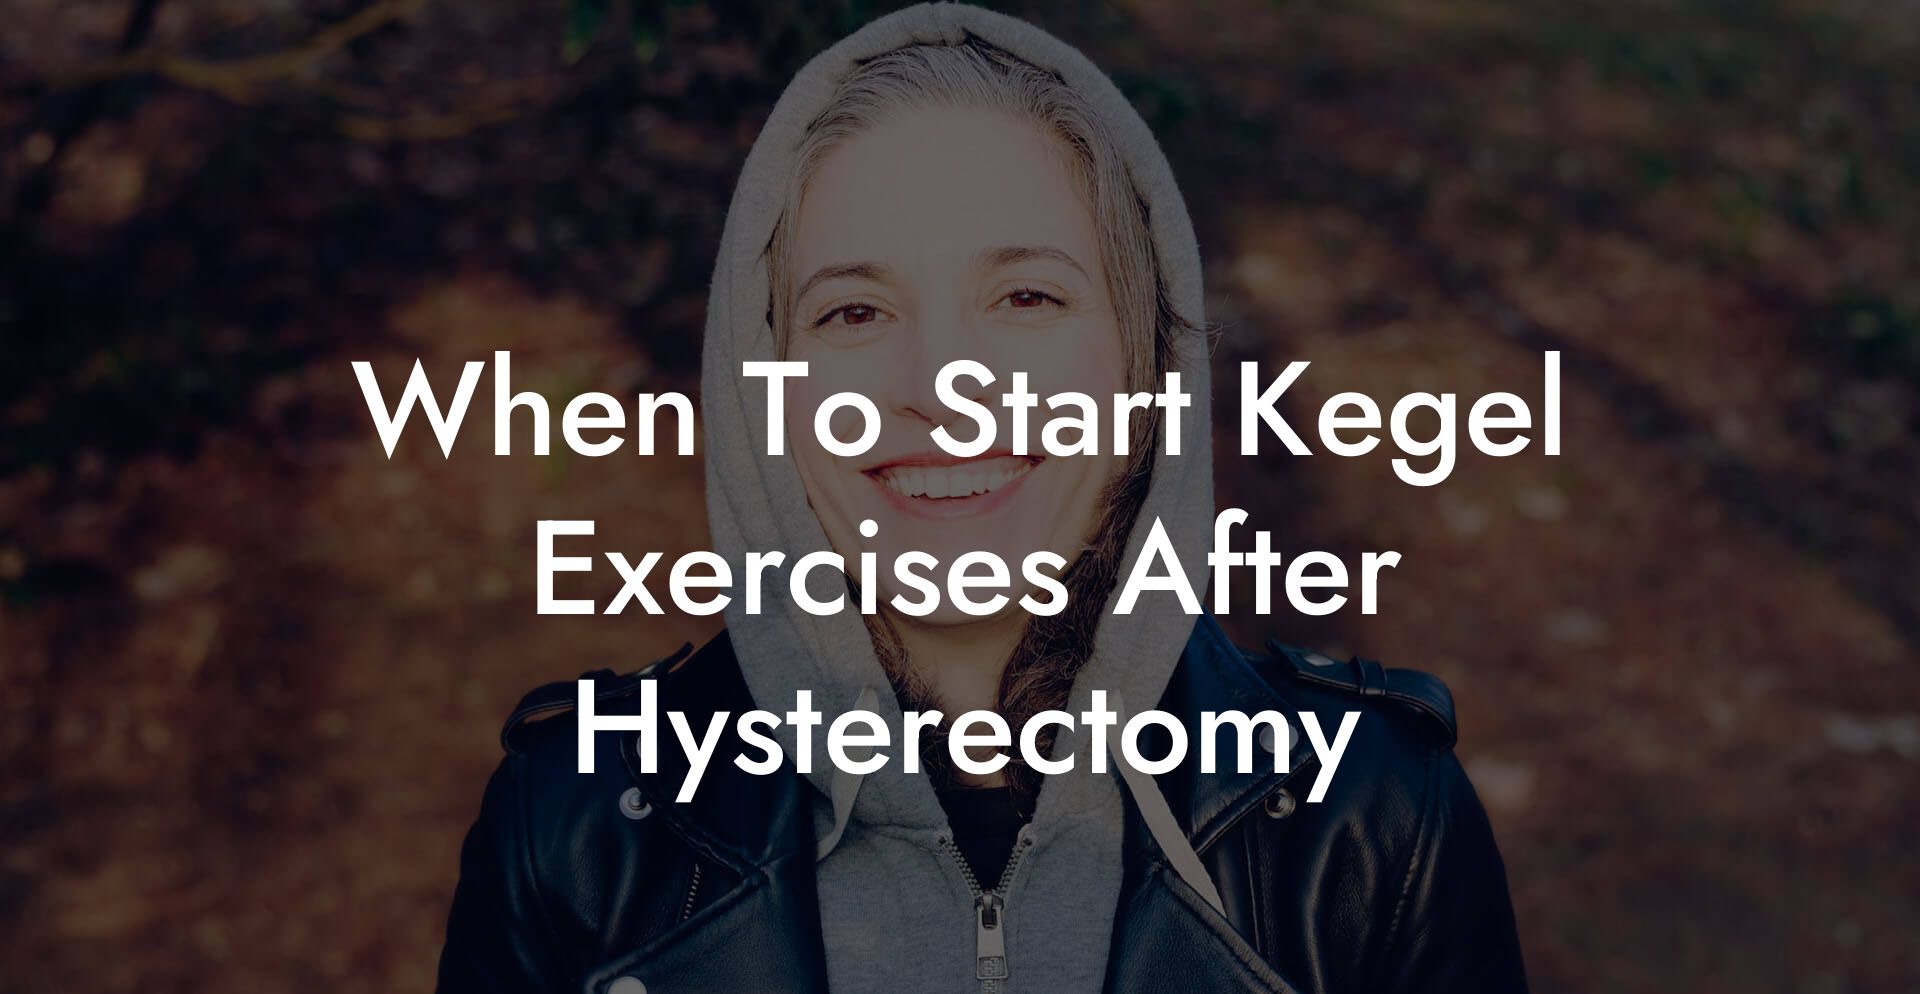 When To Start Kegel Exercises After Hysterectomy